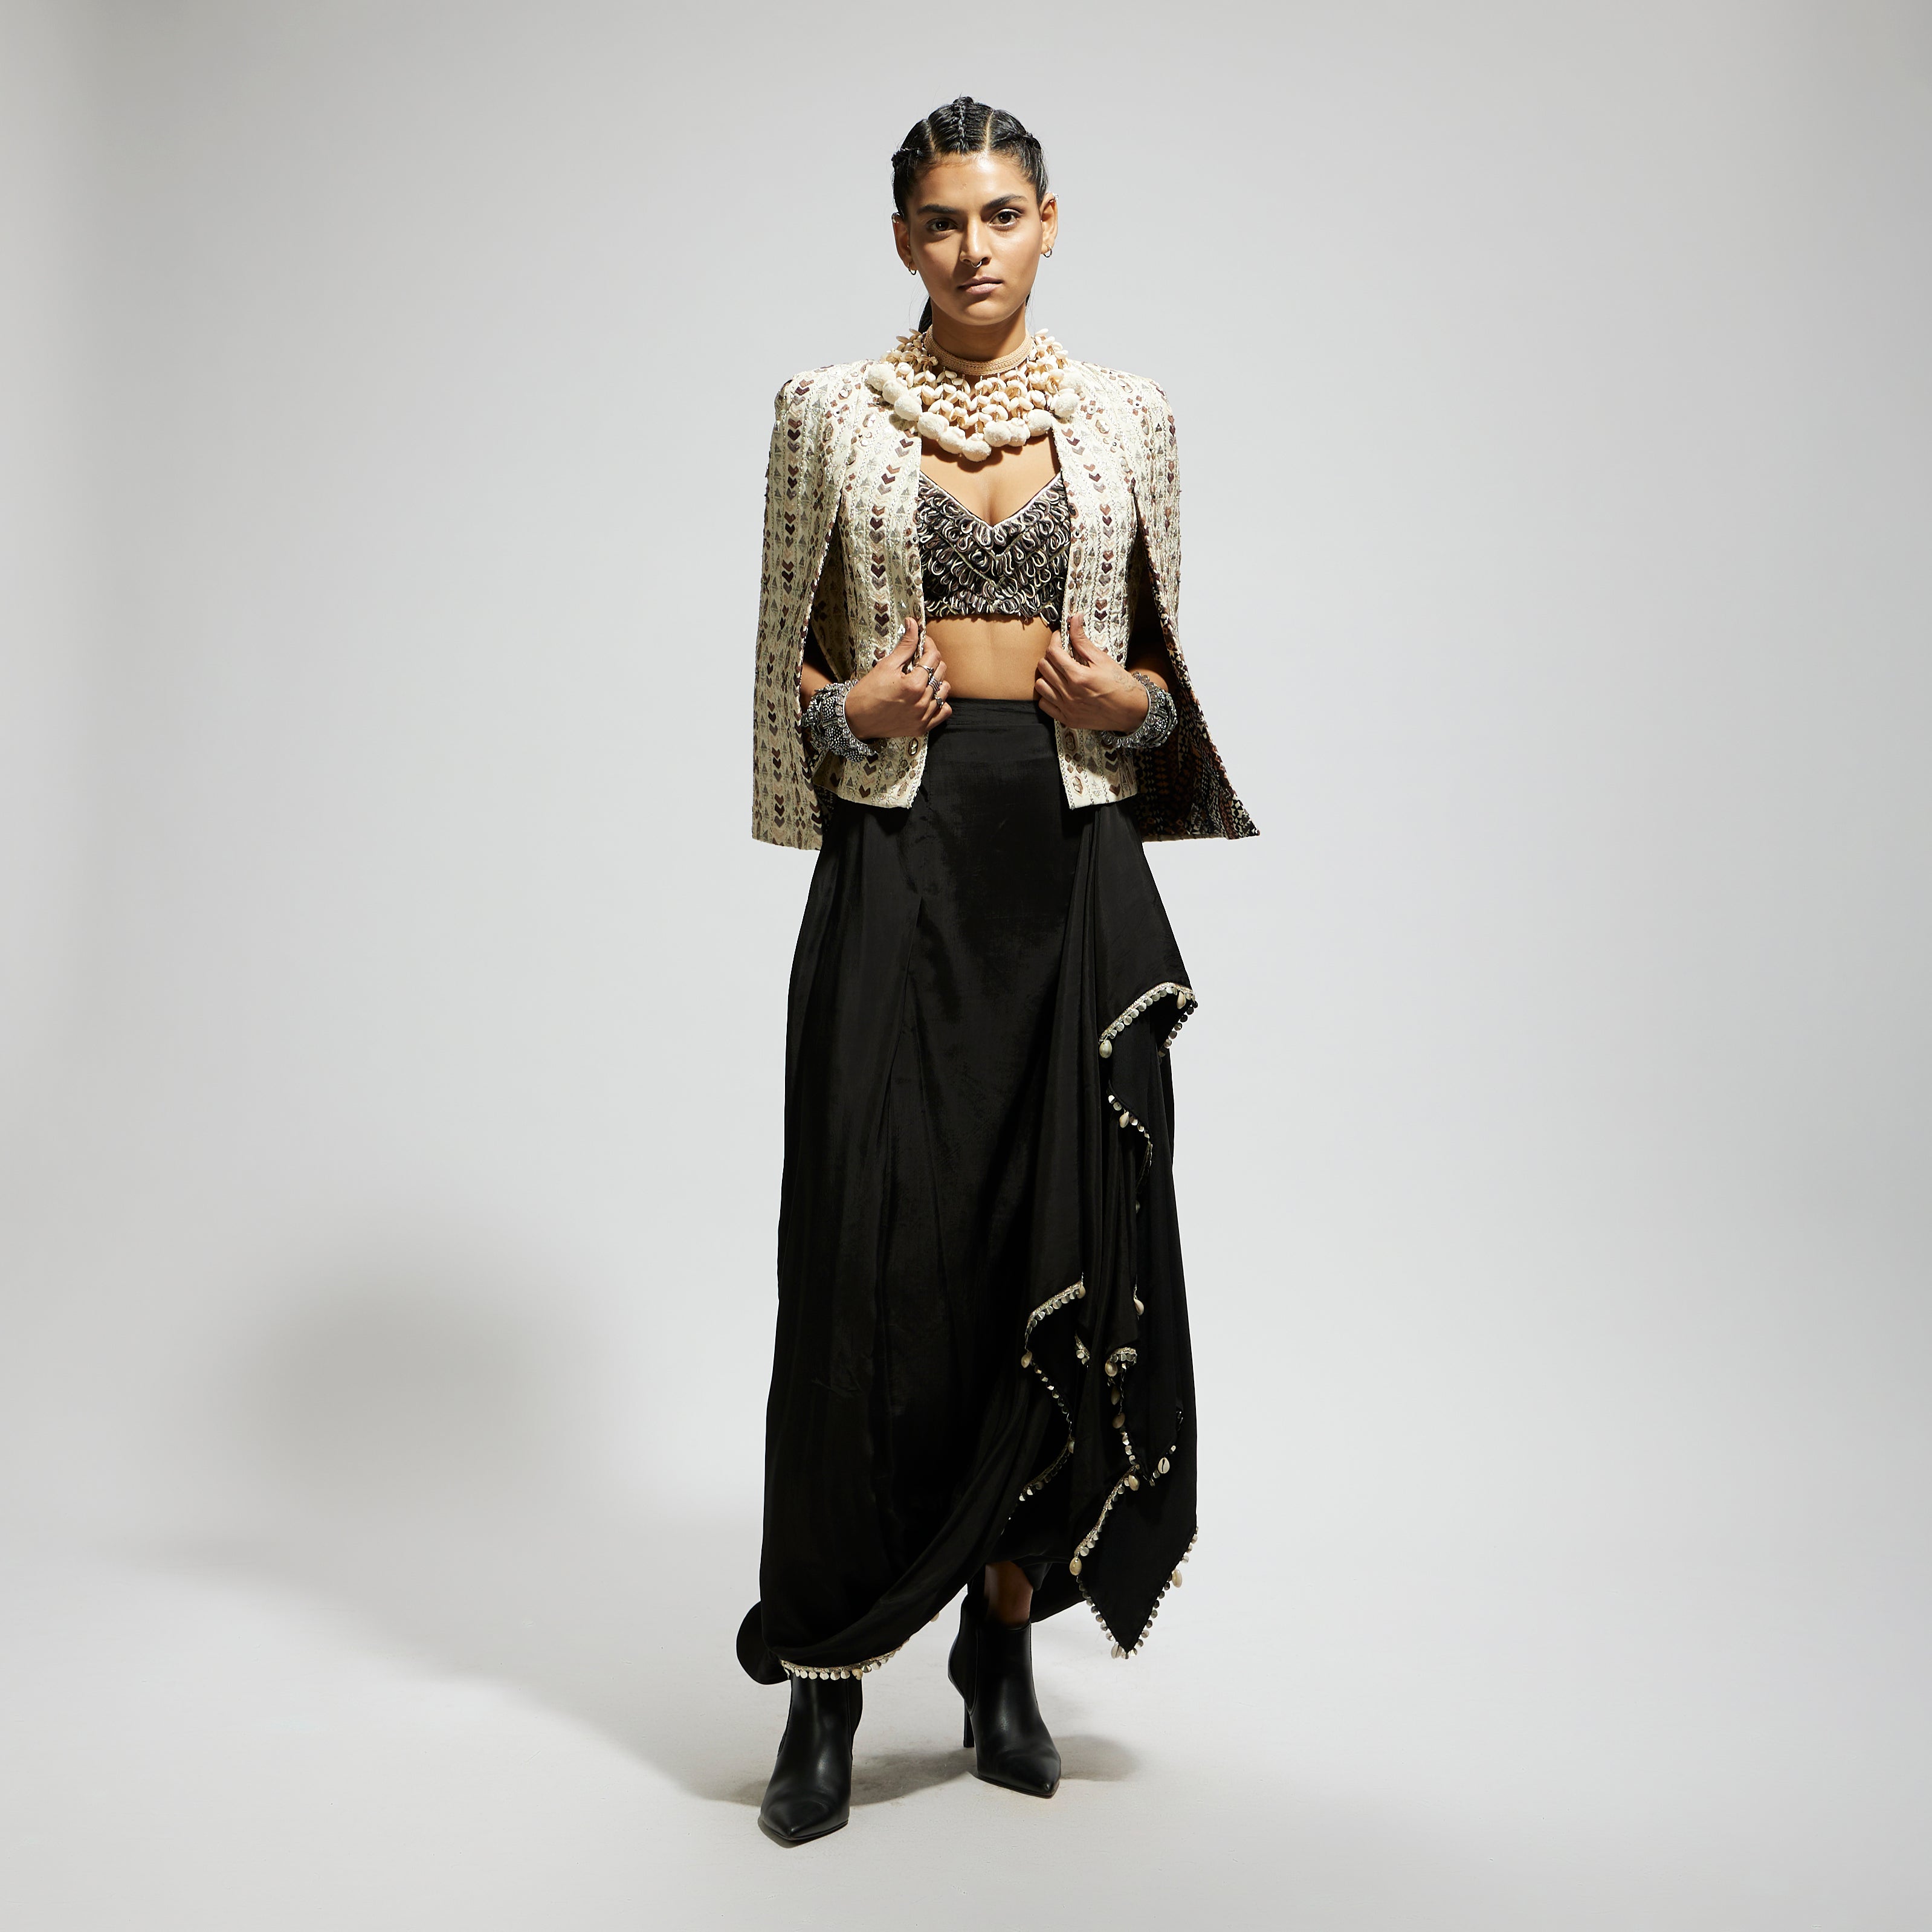 IVORY EMBELLISHED CAPE JACKET PAIRED WITH TEXTURED BUSTIER AND DRAPE SKIRT